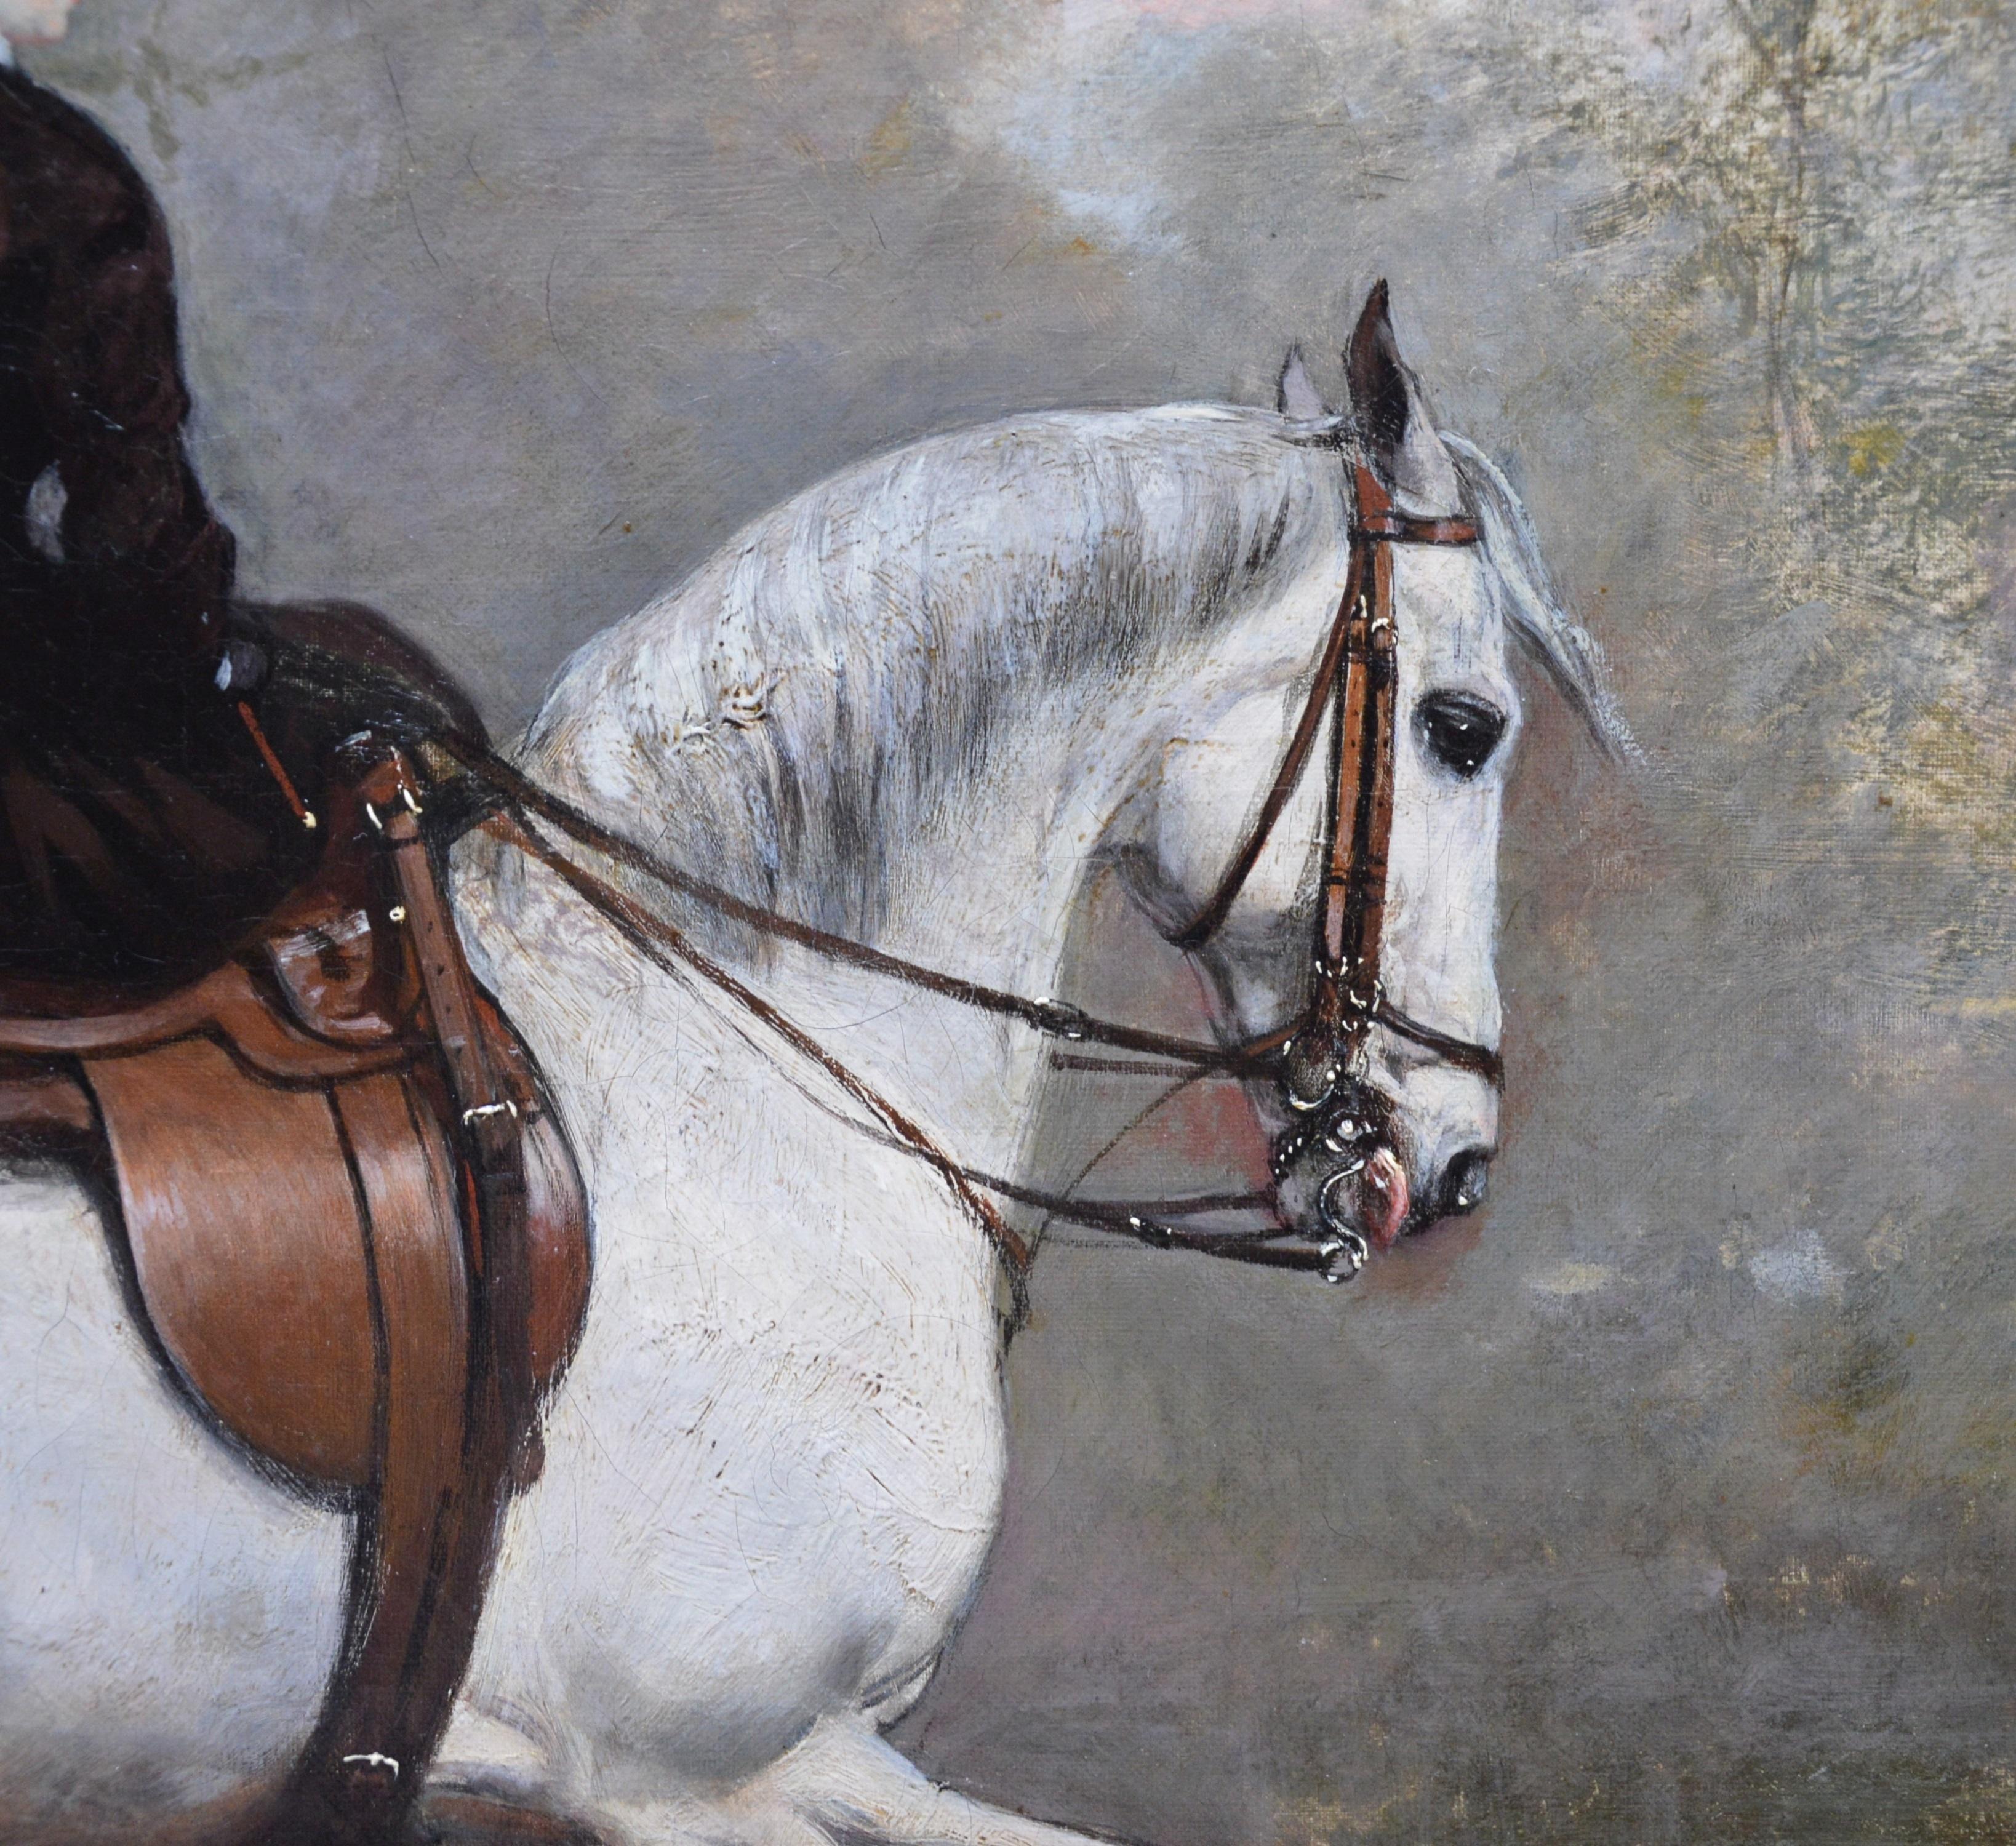 Elegant Lady on a White Horse - 19th Century Equestrian Oil Painting Portrait  - Black Animal Painting by Sir Francis Grant PRA